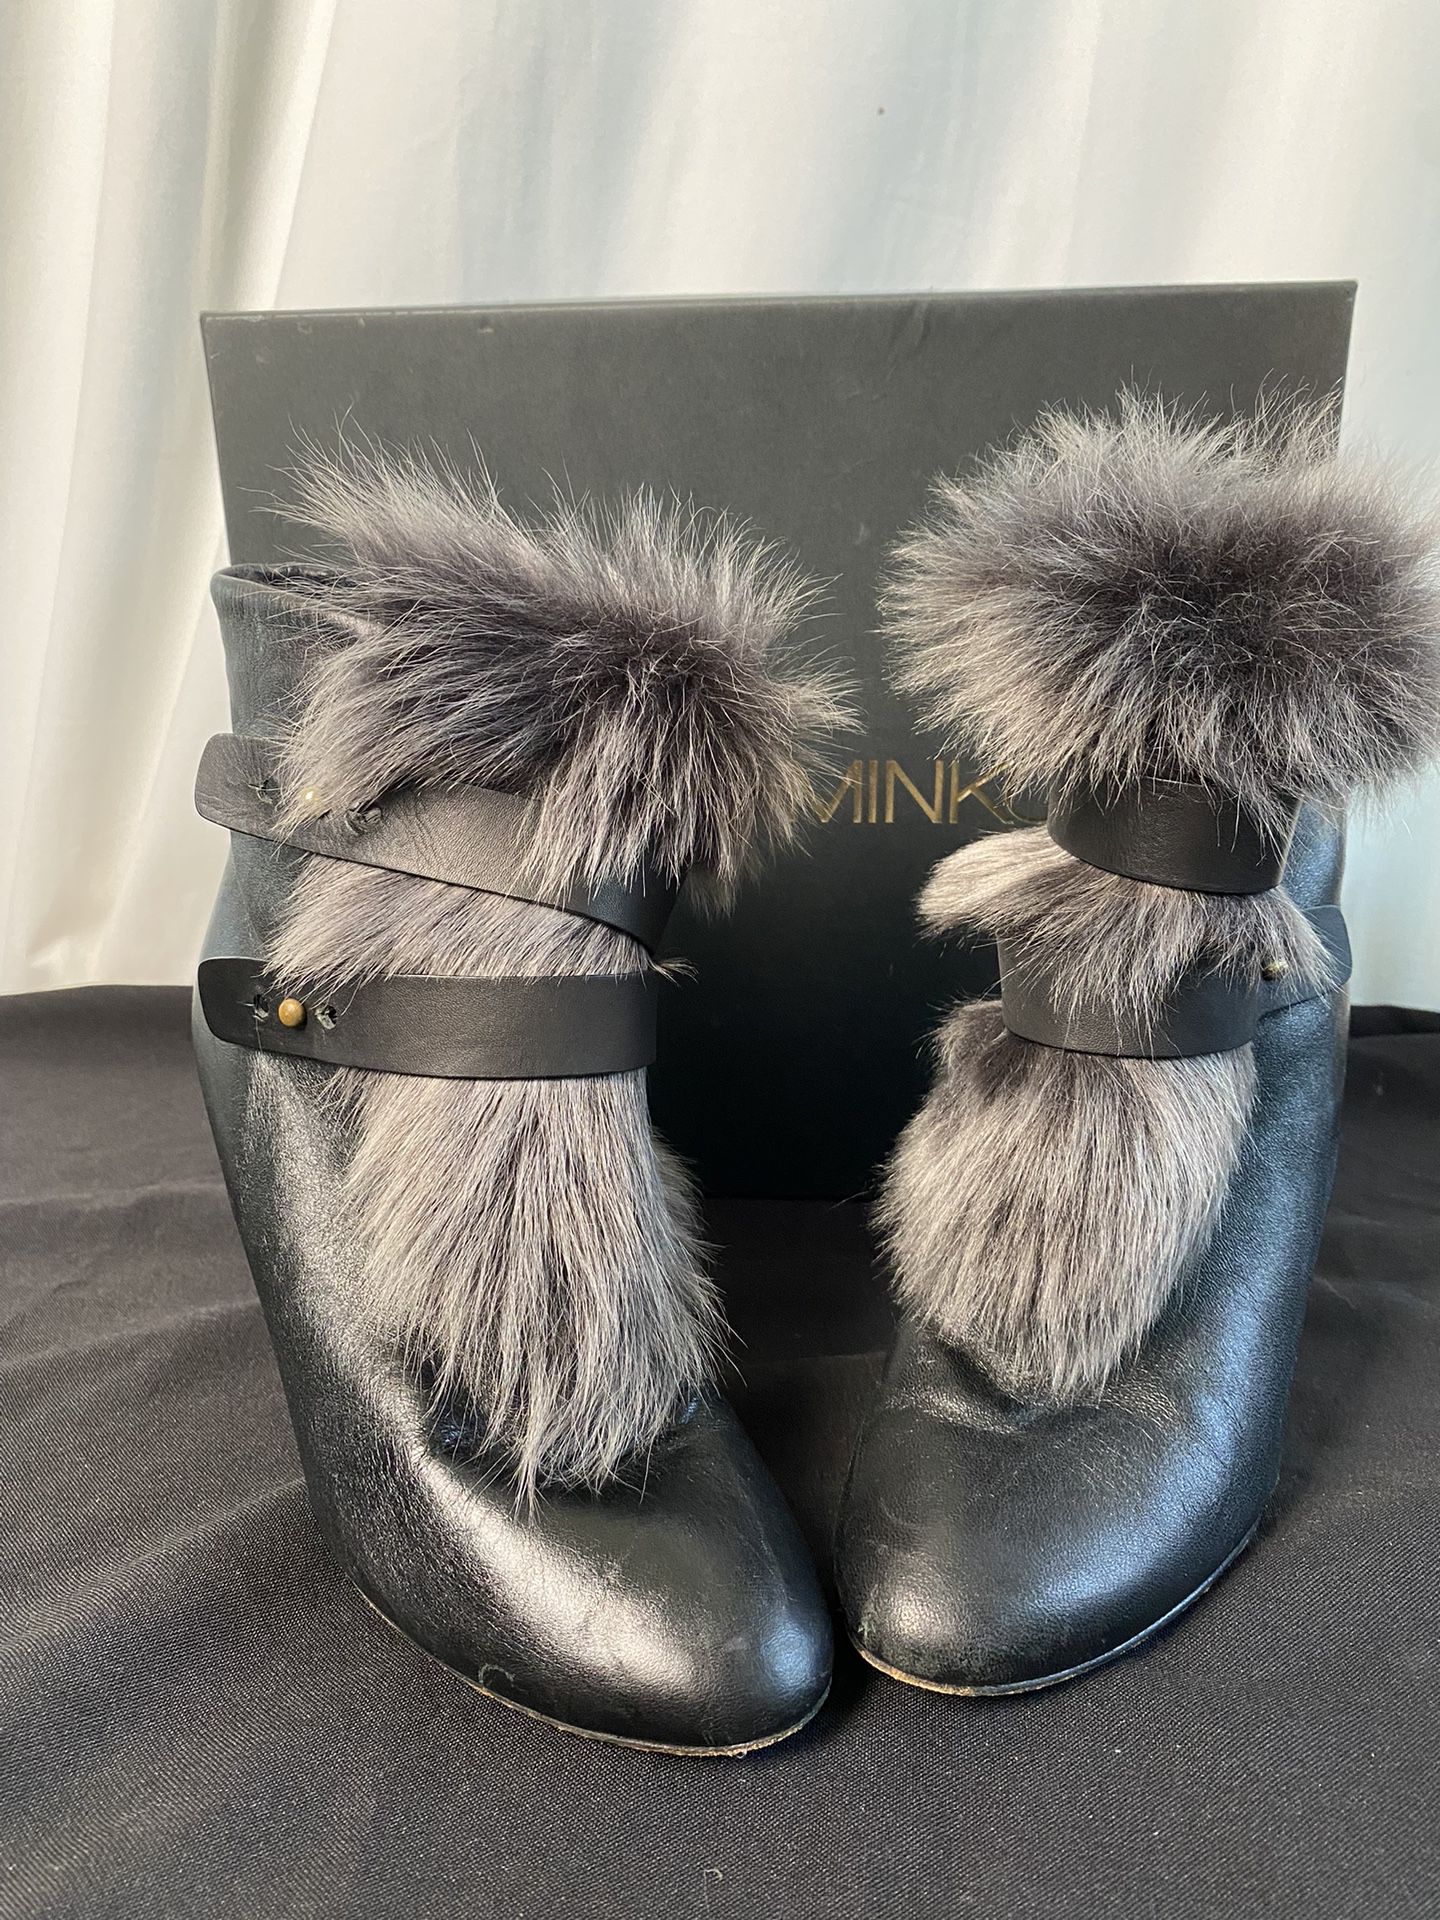 Rebecca Minkoff Black Leather Short Fur Boot Style Heels Shoes Women’s Size 7 (Retail $325) Made In Spain